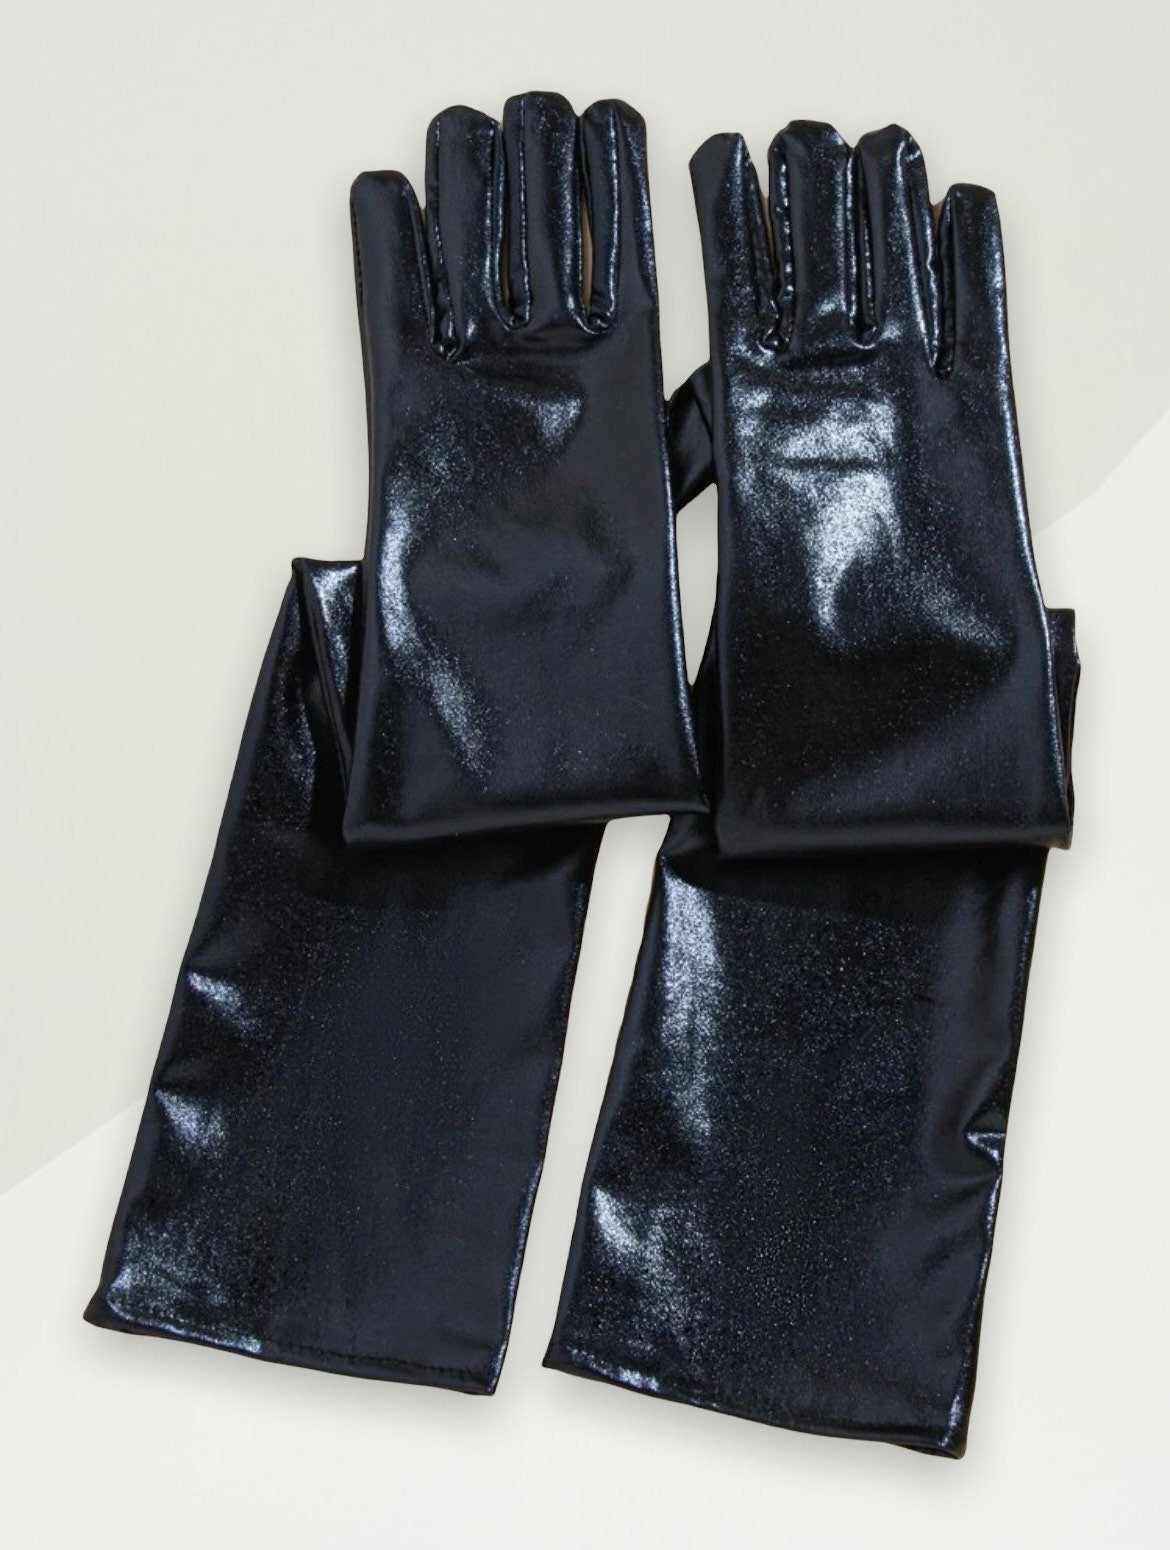 Lingerie accessory gloves